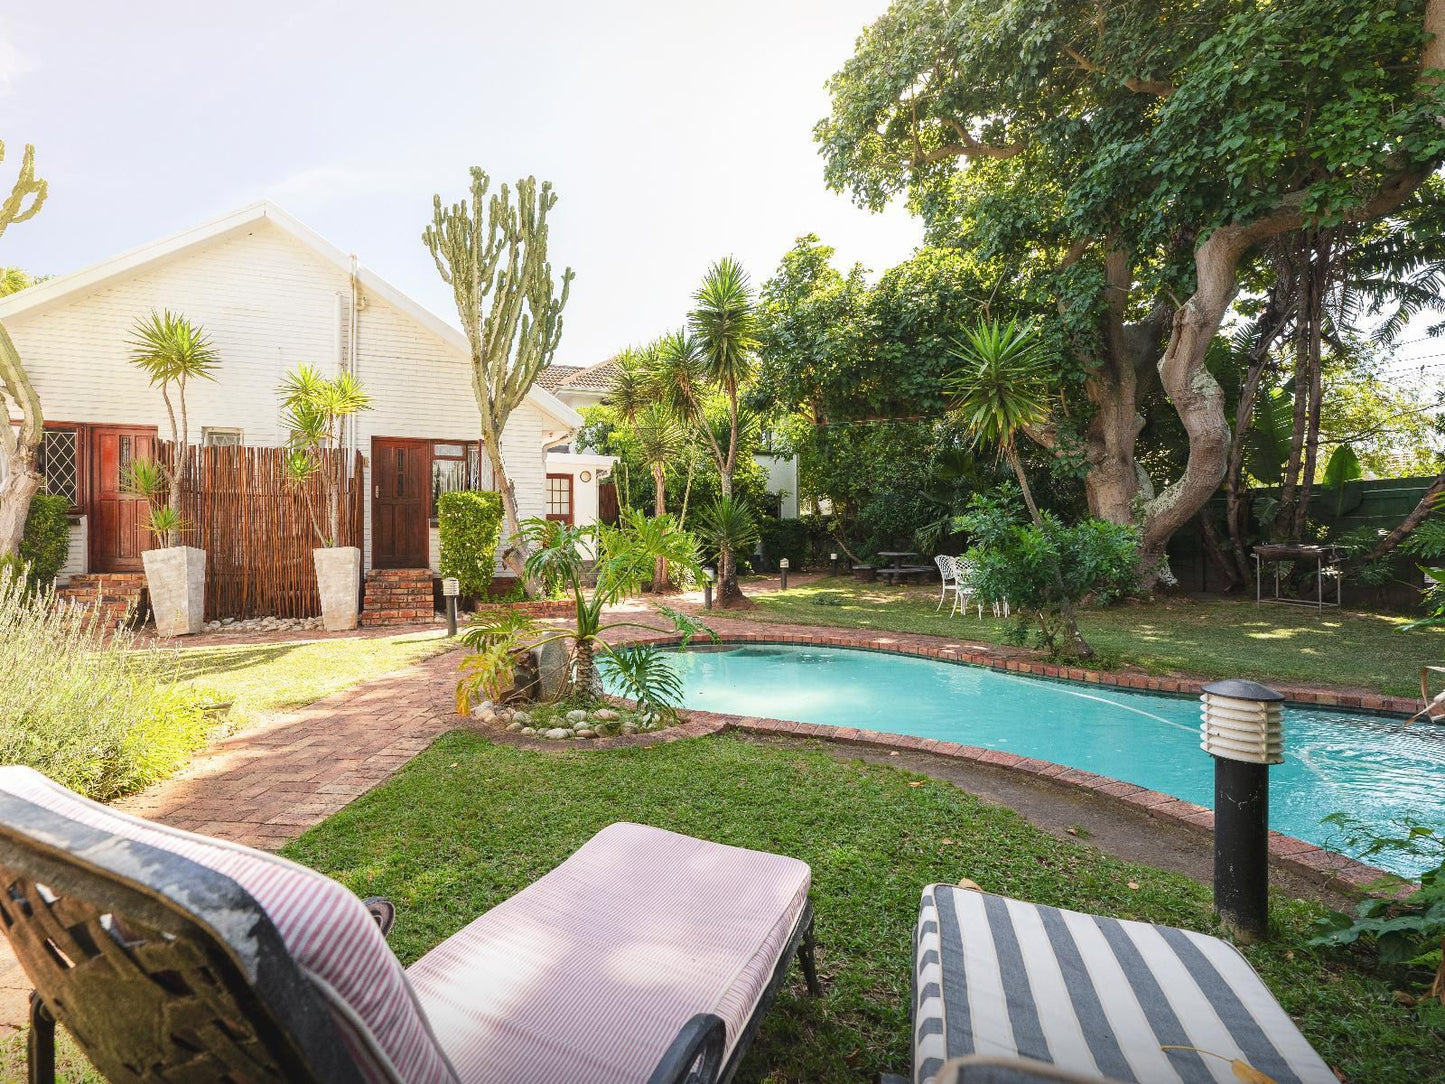 Africa Beach Bed And Breakfast Summerstrand Port Elizabeth Eastern Cape South Africa House, Building, Architecture, Palm Tree, Plant, Nature, Wood, Garden, Swimming Pool